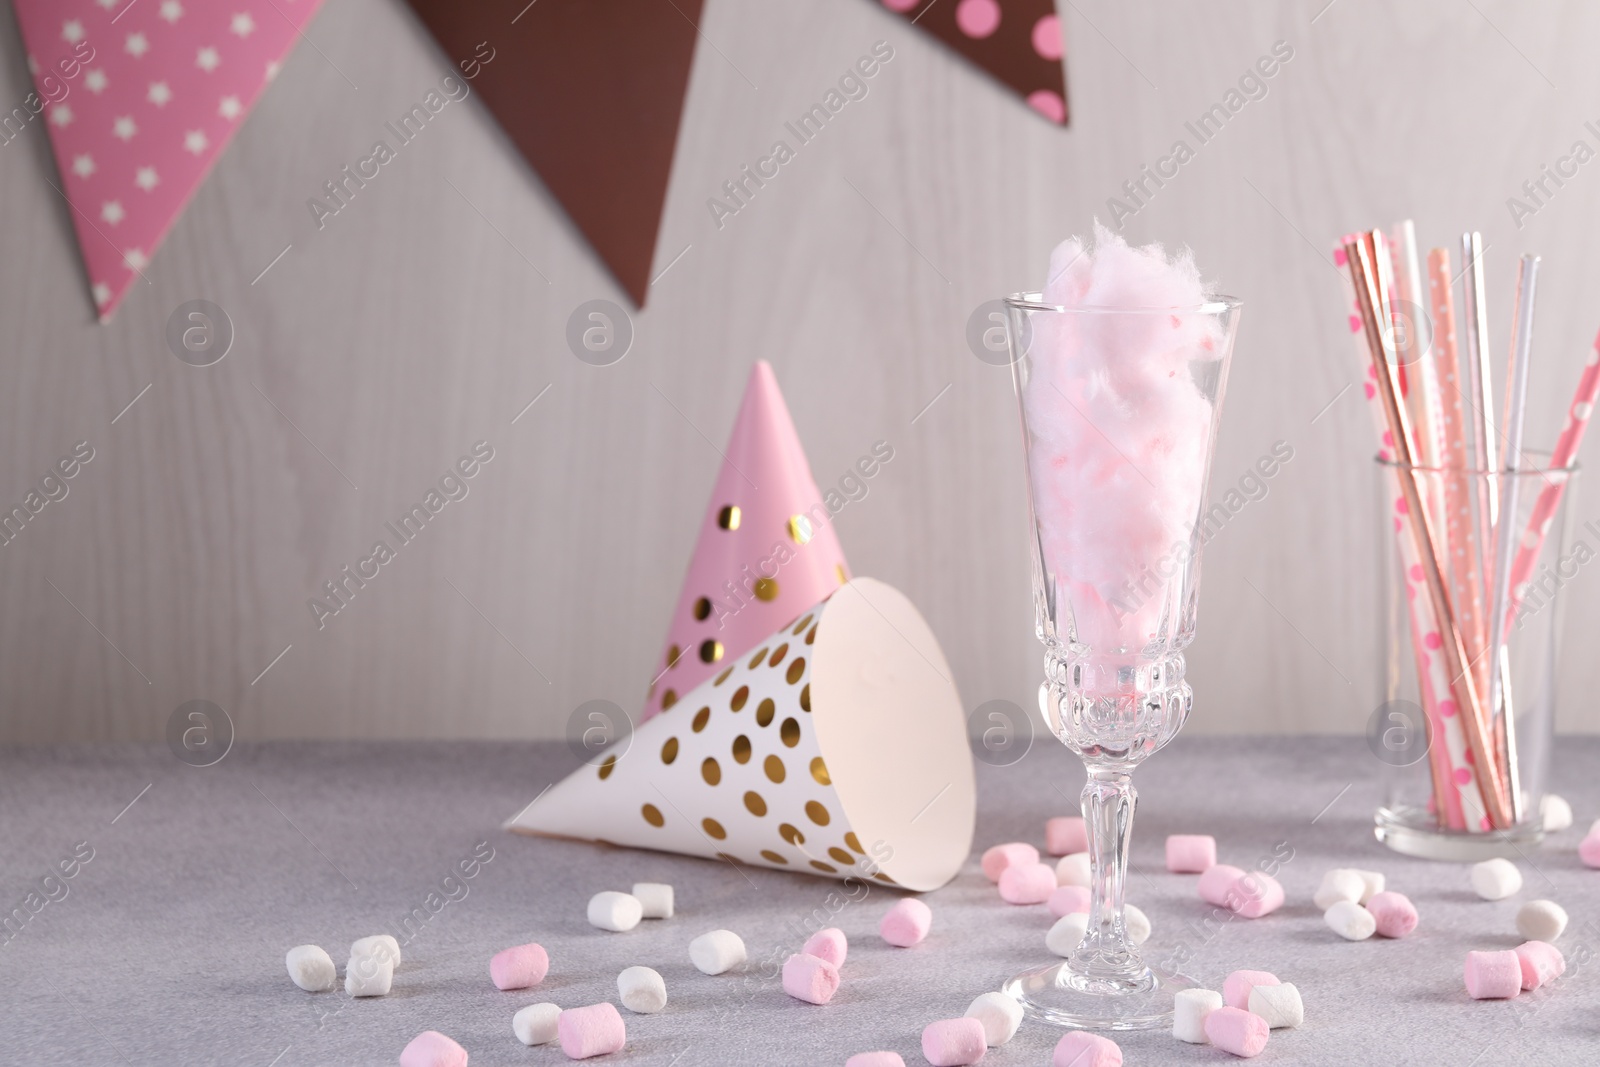 Photo of Tasty cotton candy cocktail in glass, festive decor and marshmallows on gray table against light wooden wall